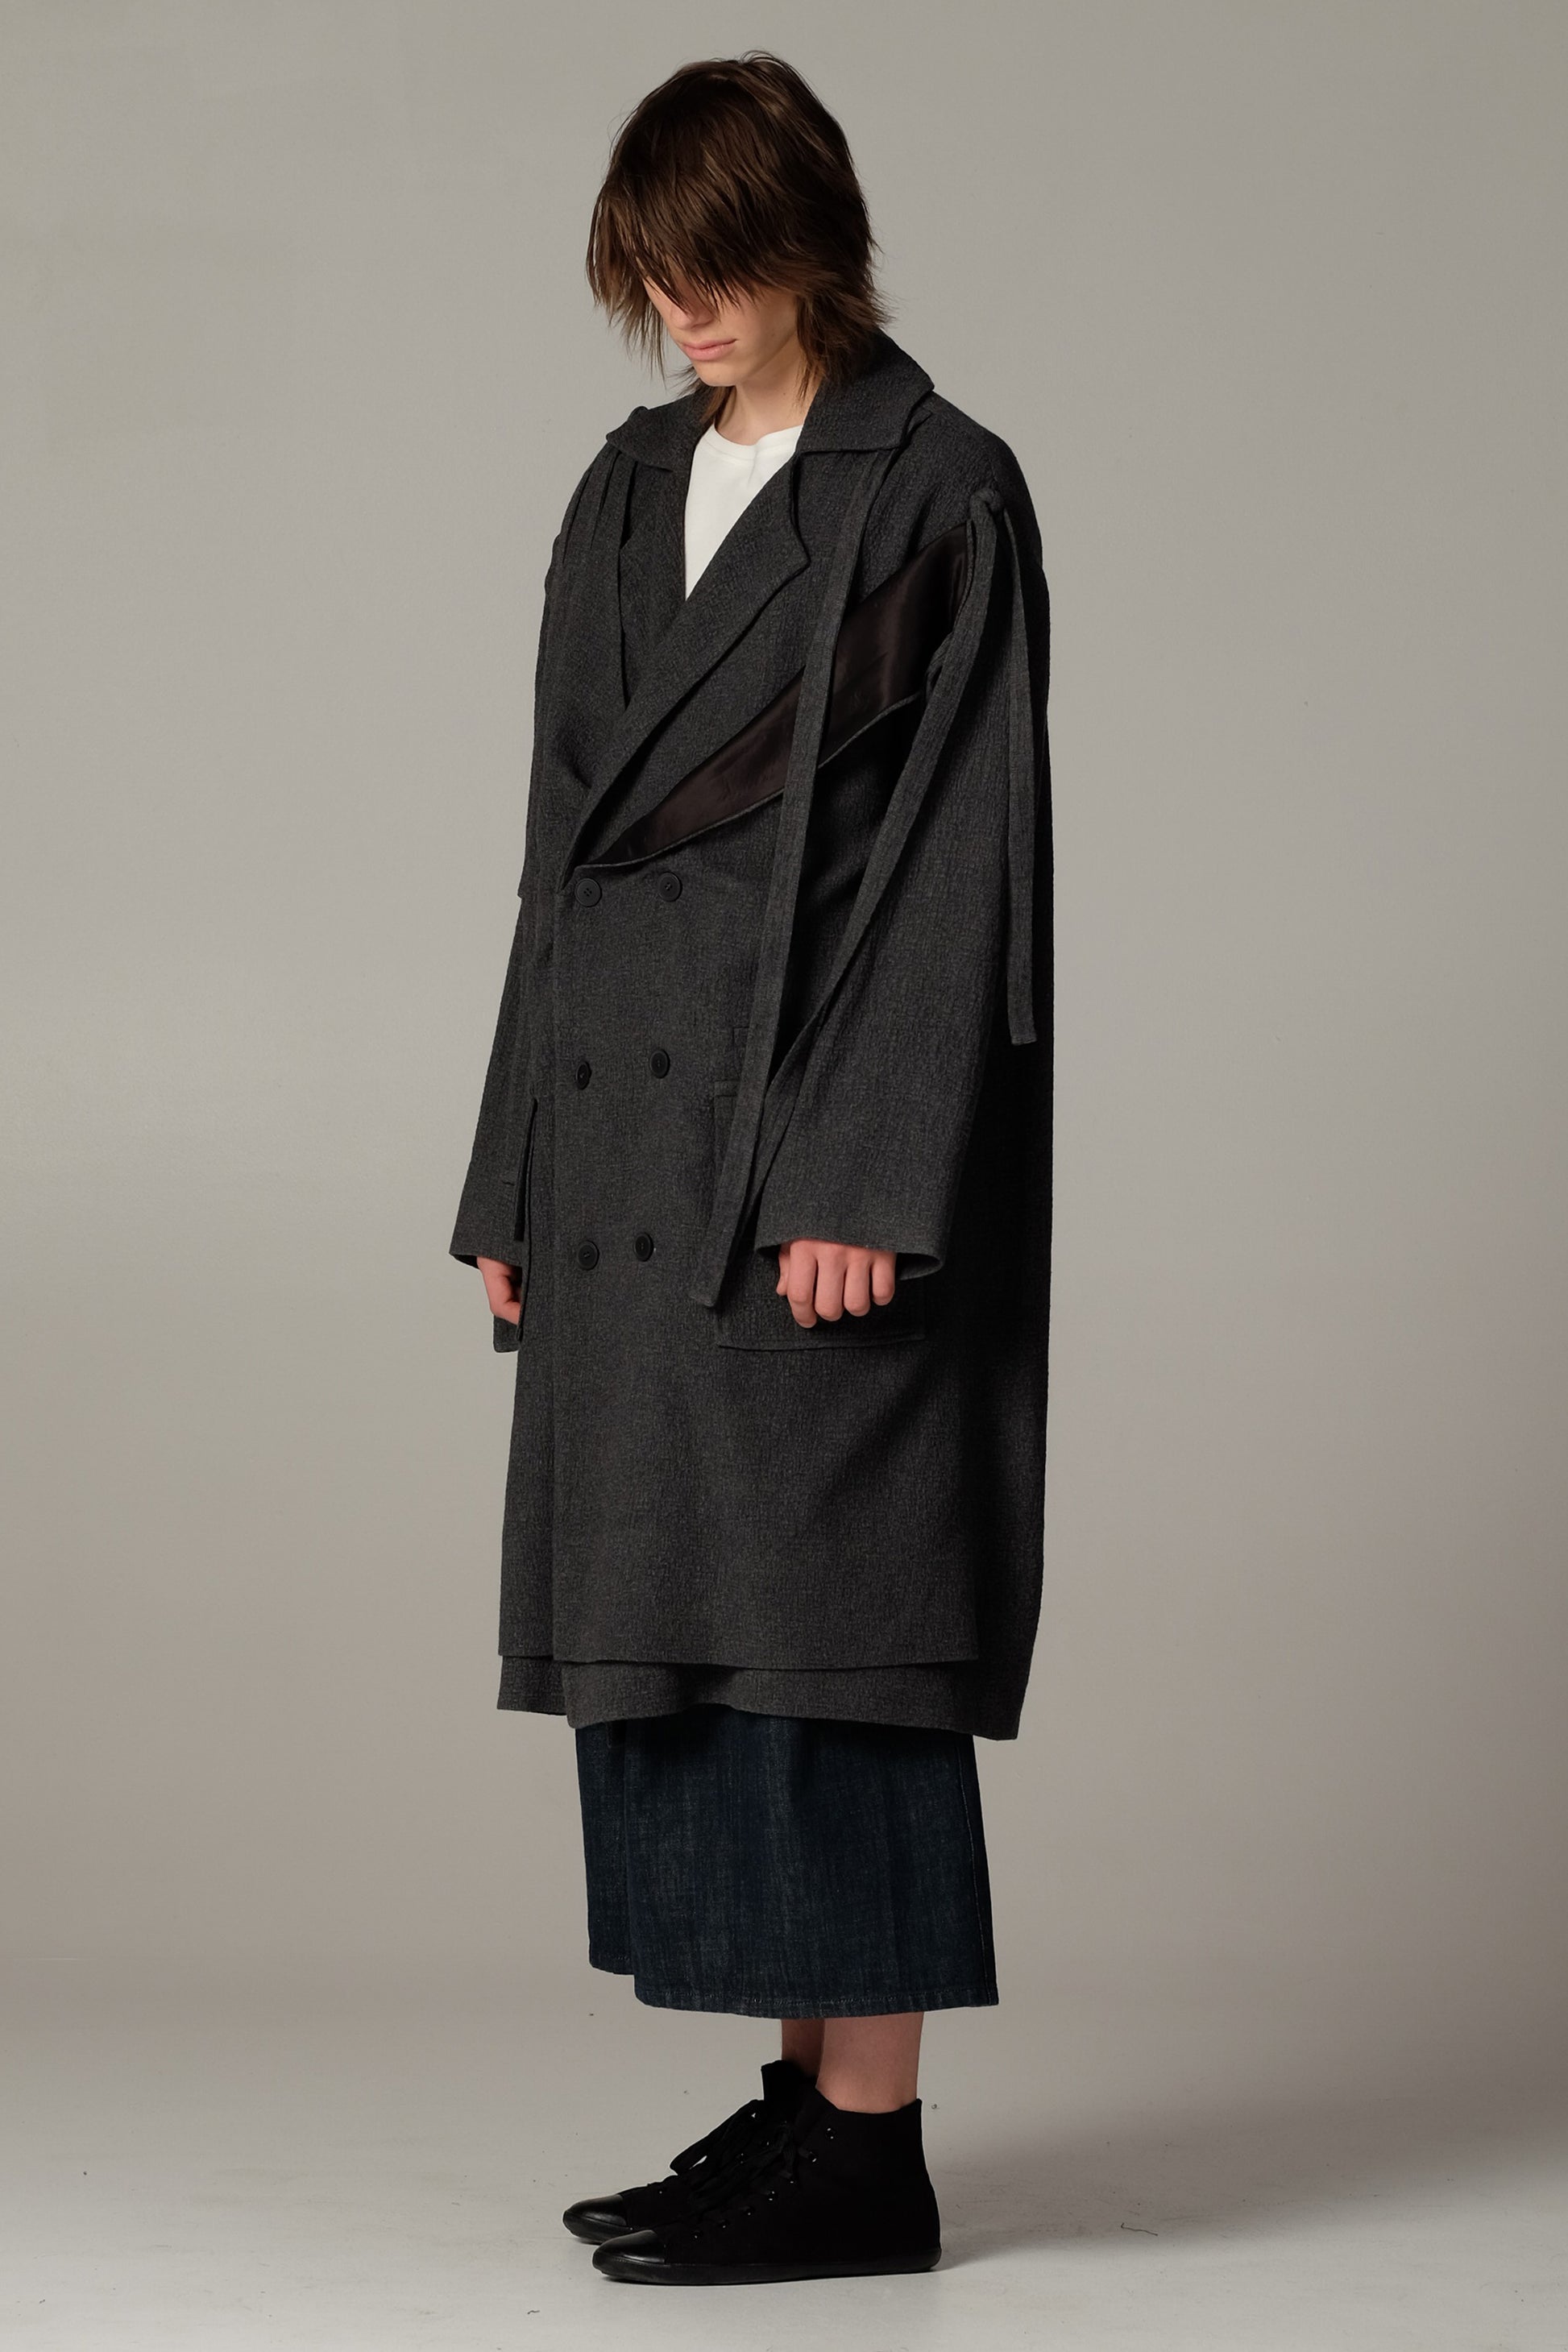 OUTSIDER wool coat - One Wolf